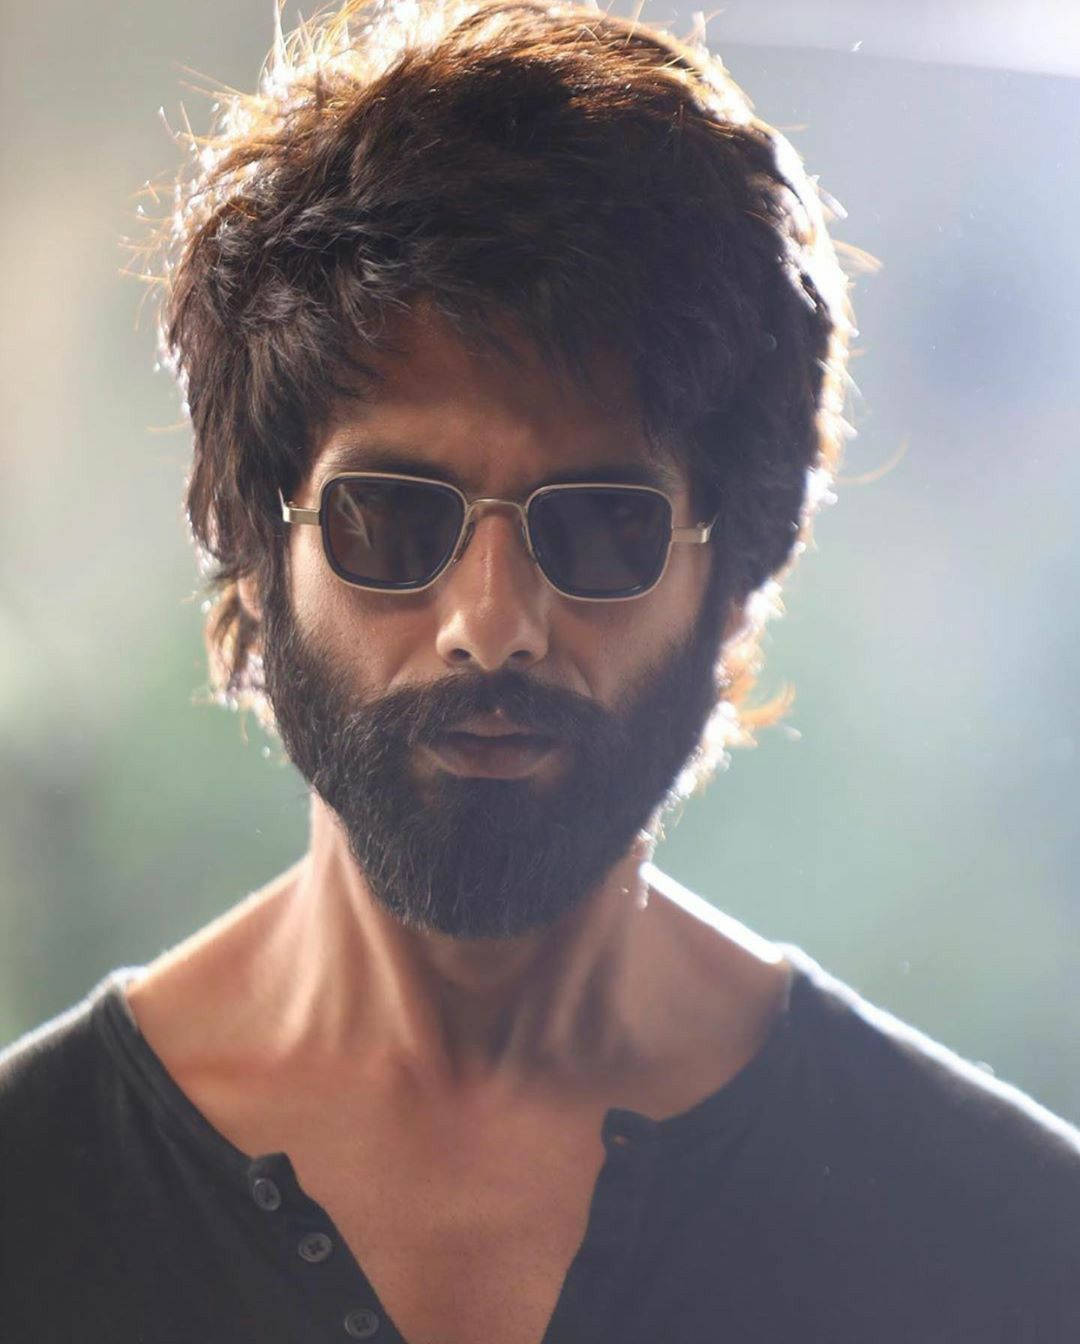 Shahid Kapoor Flaunting His Style With Shades Background